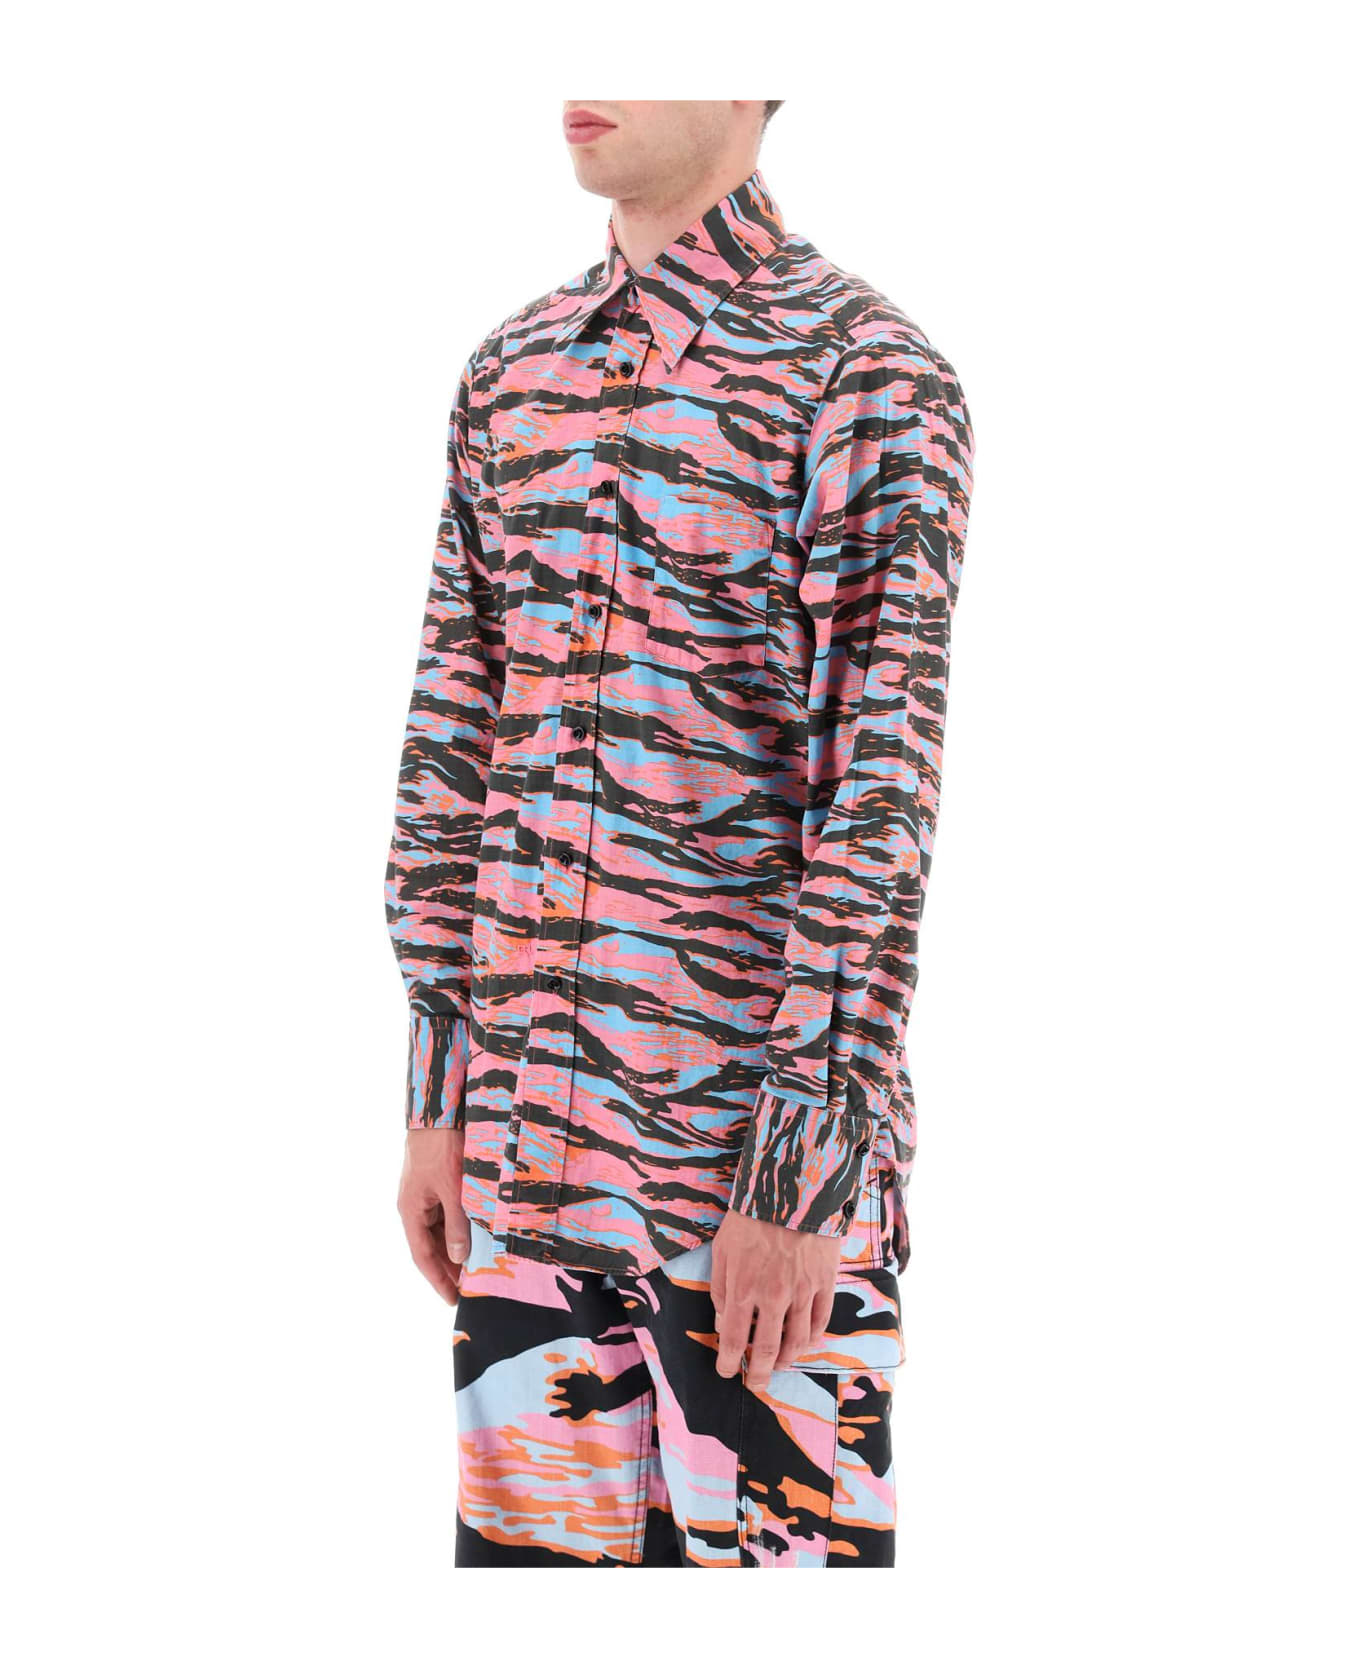 ERL Camouflage Cotton Shirt - ERL PINK RAVE CAMO 2 (Black) シャツ